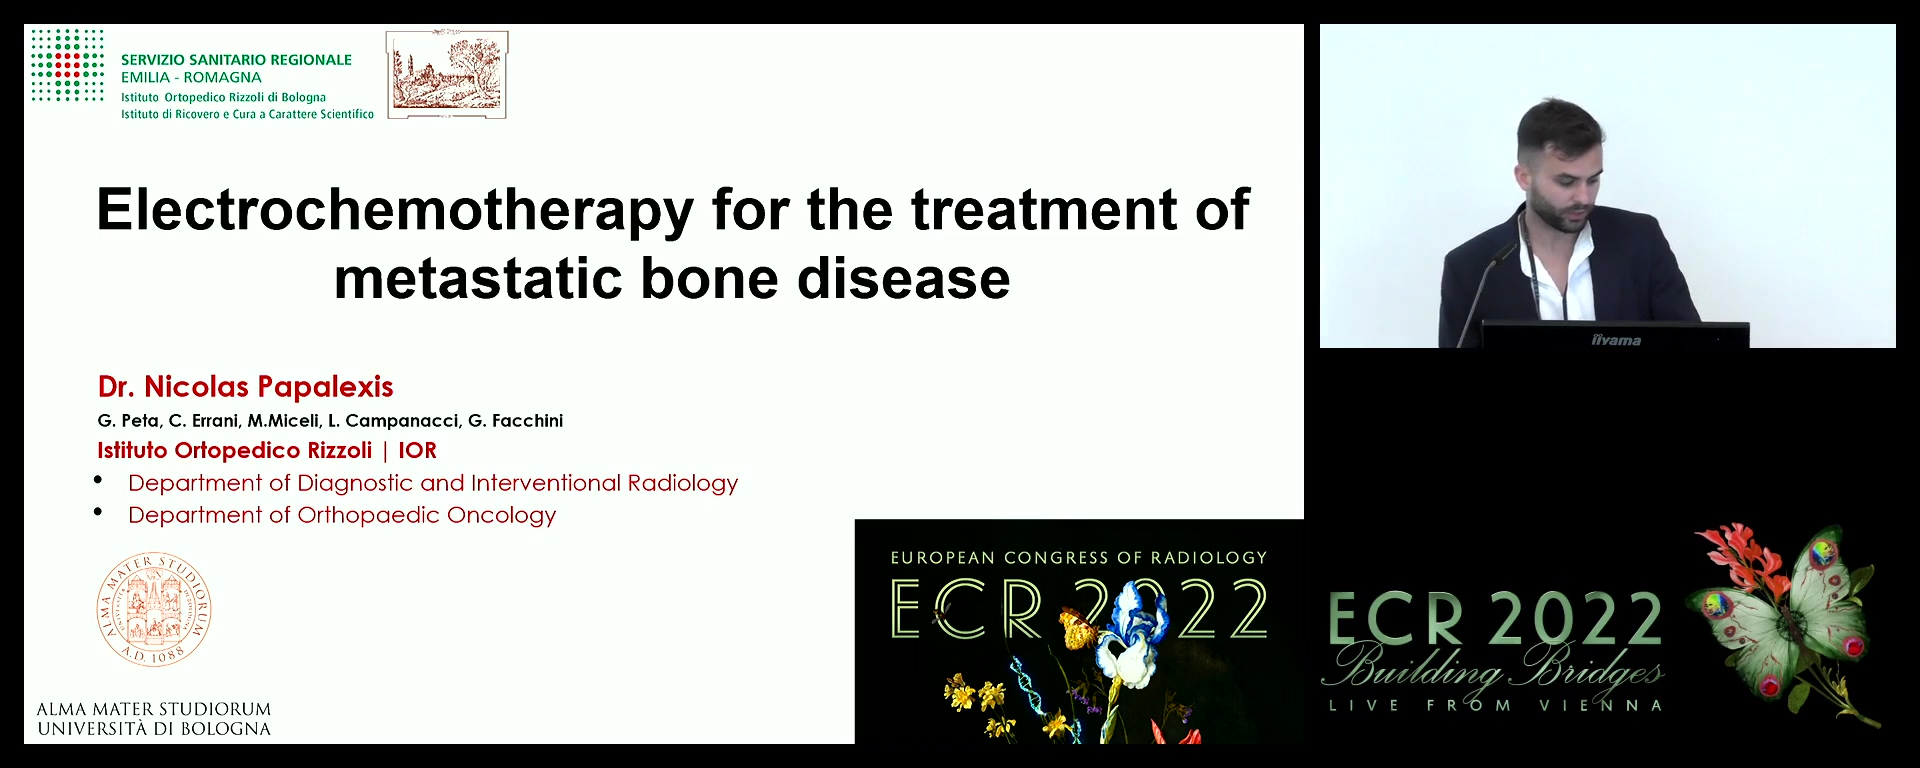 Electrochemotherapy (ECT) with bleomycin in the treatment of bone metastases - Nicolas Papalexis, Bologna / IT